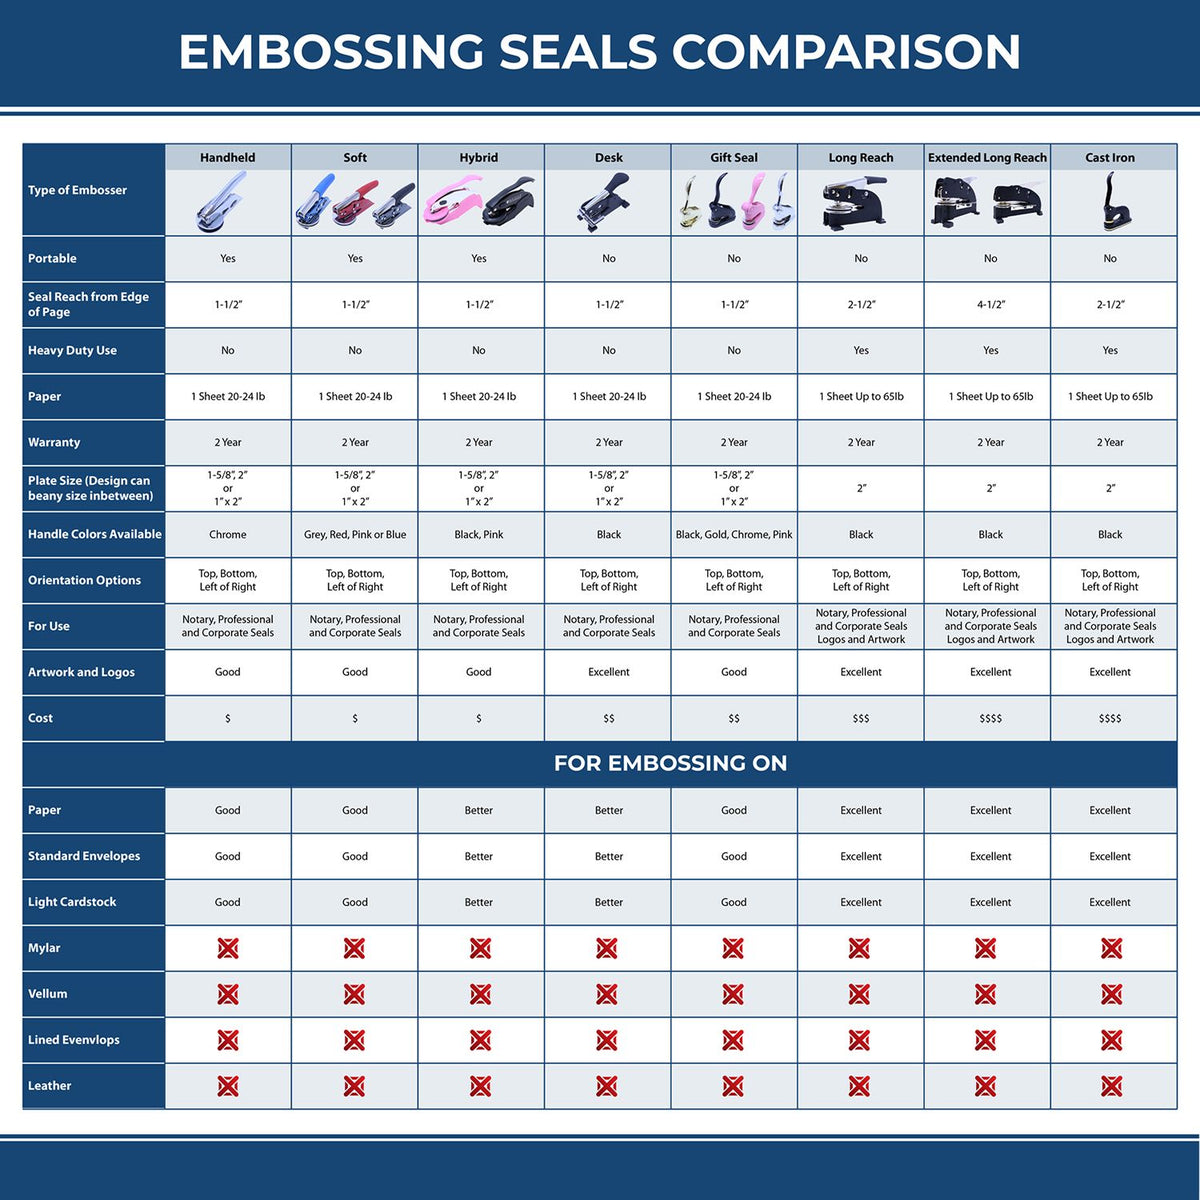 A comparison chart for the different types of mount models available for the Hybrid Massachusetts Land Surveyor Seal